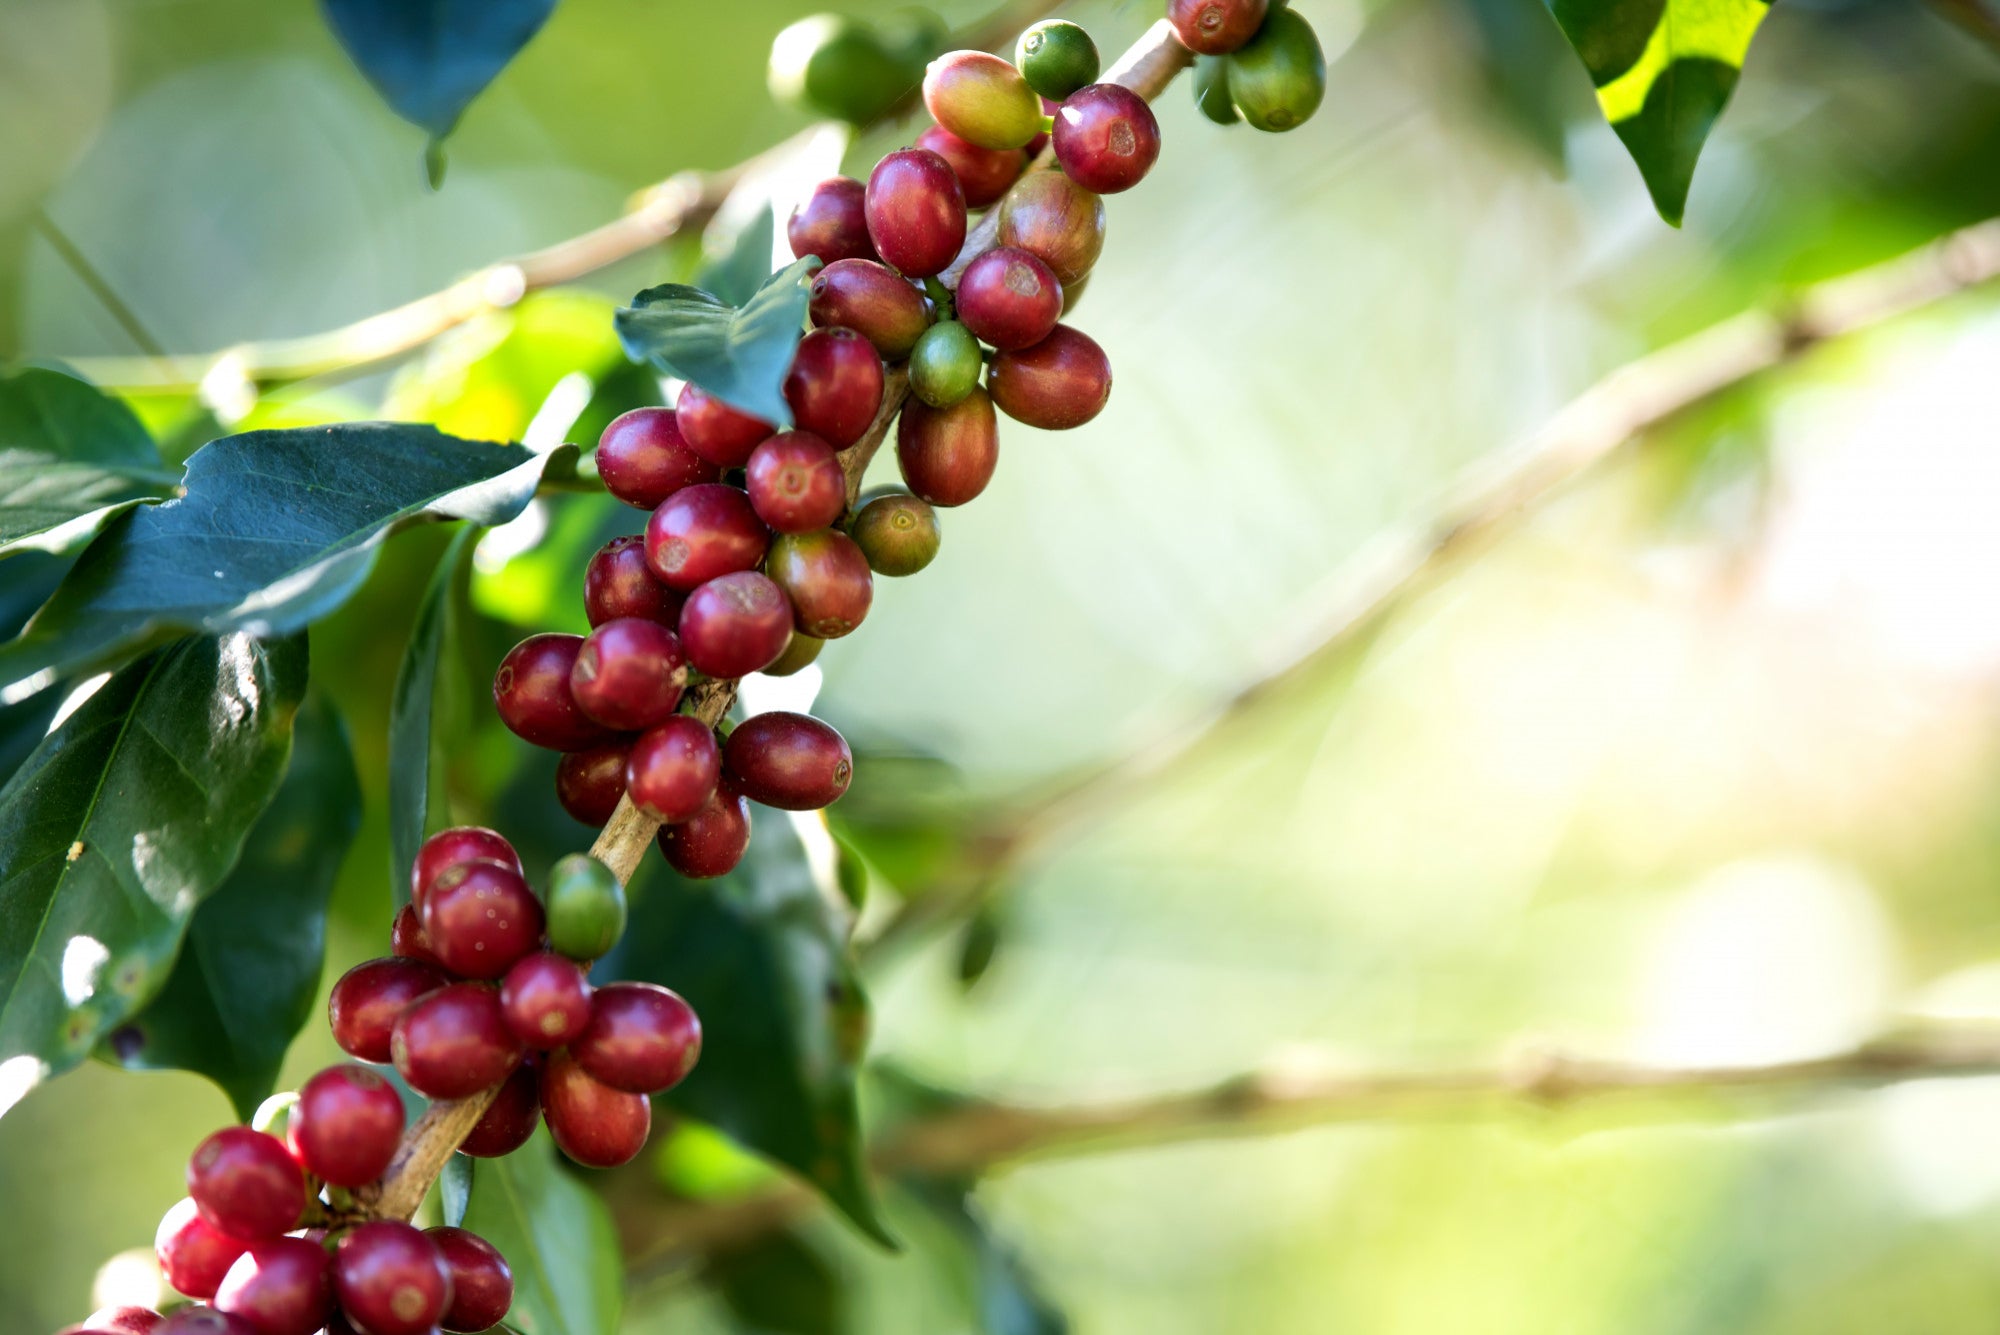 Ripening coffee beans on the tree